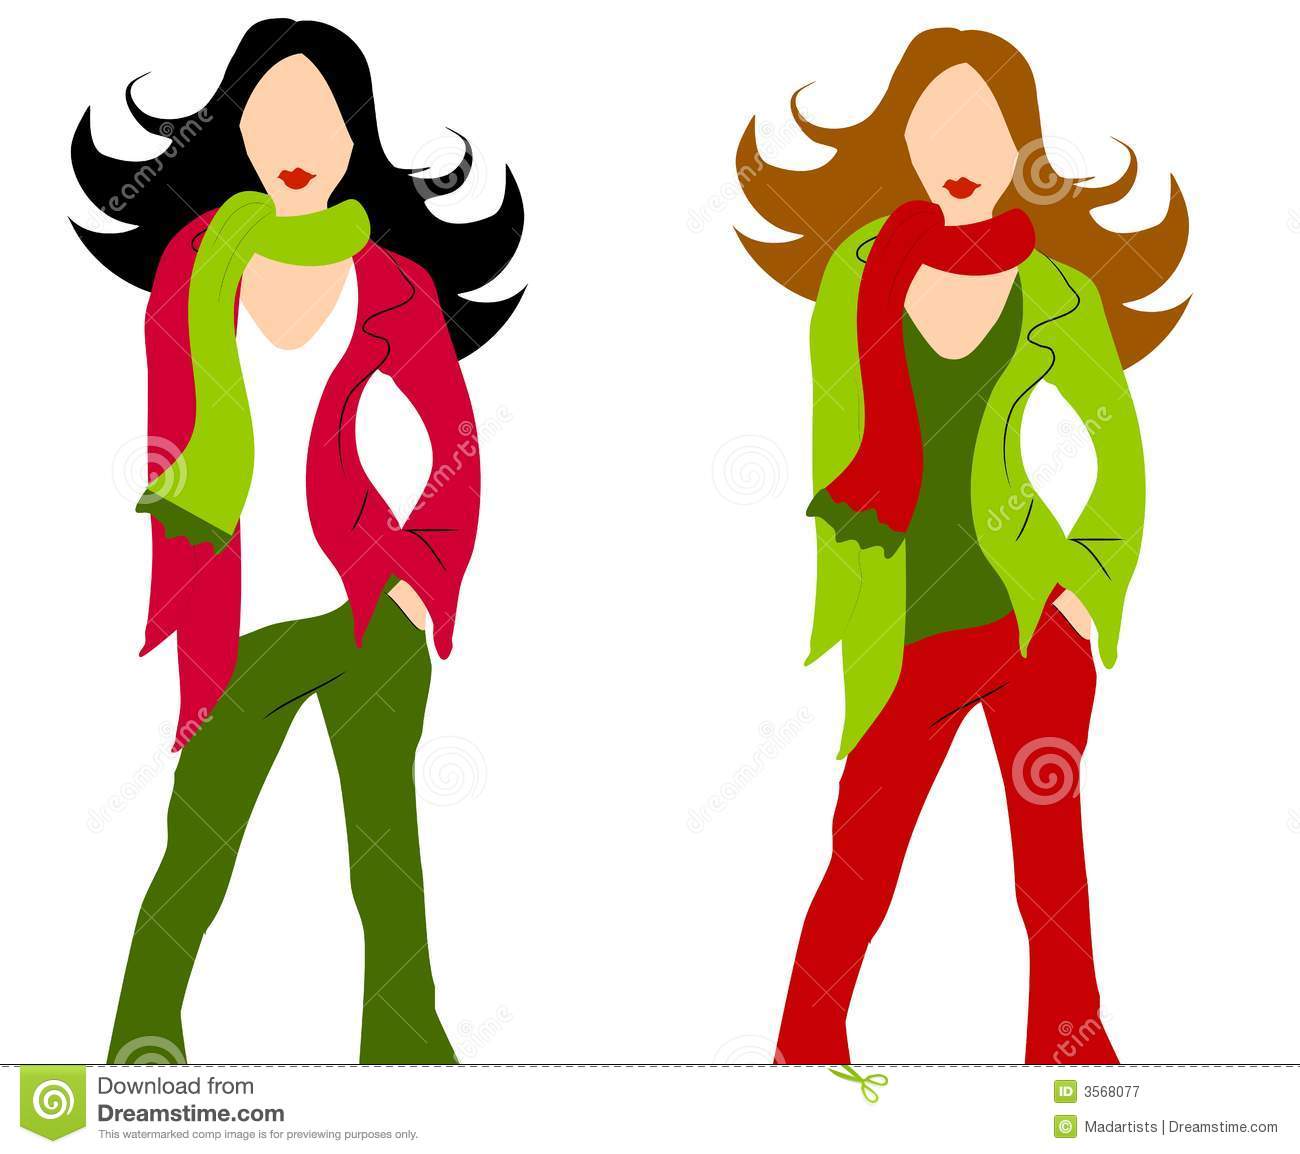 Clip Art Illustration Of Your Choice Of 2 Caucasian Fashion Models